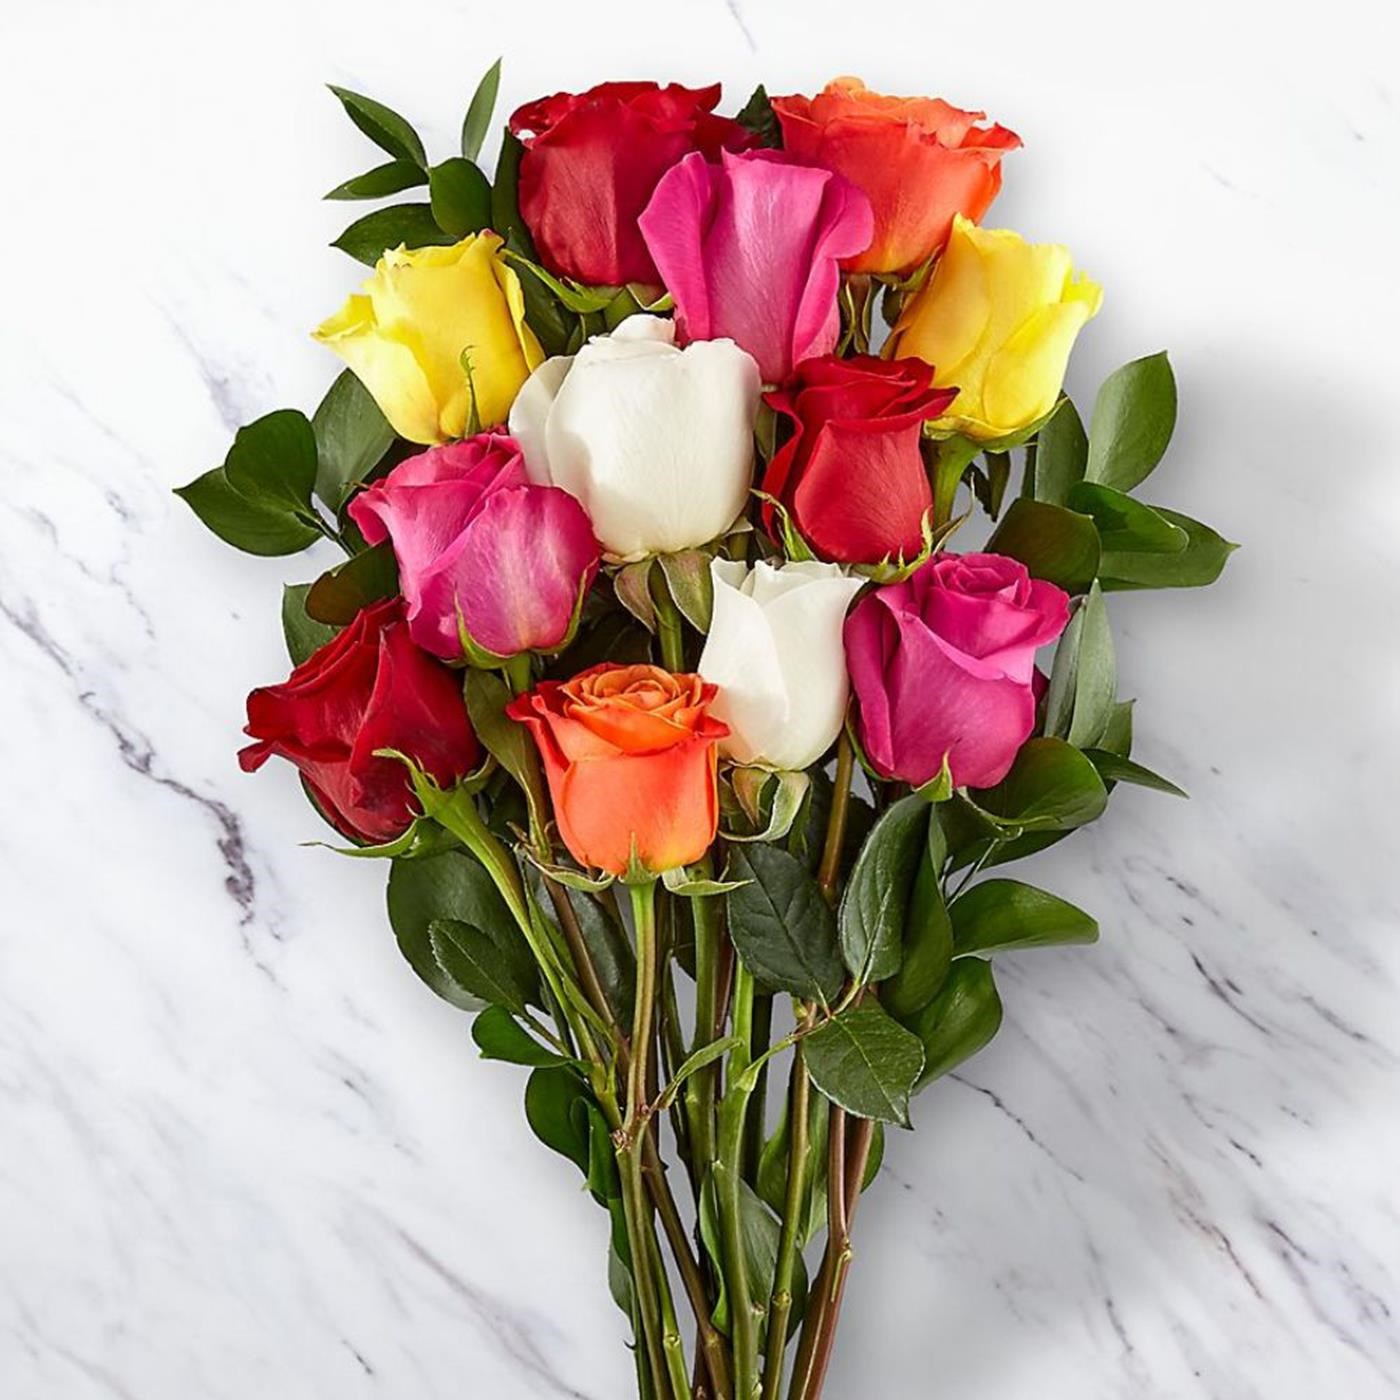 product image for 12 Mixed Roses in a bunch.